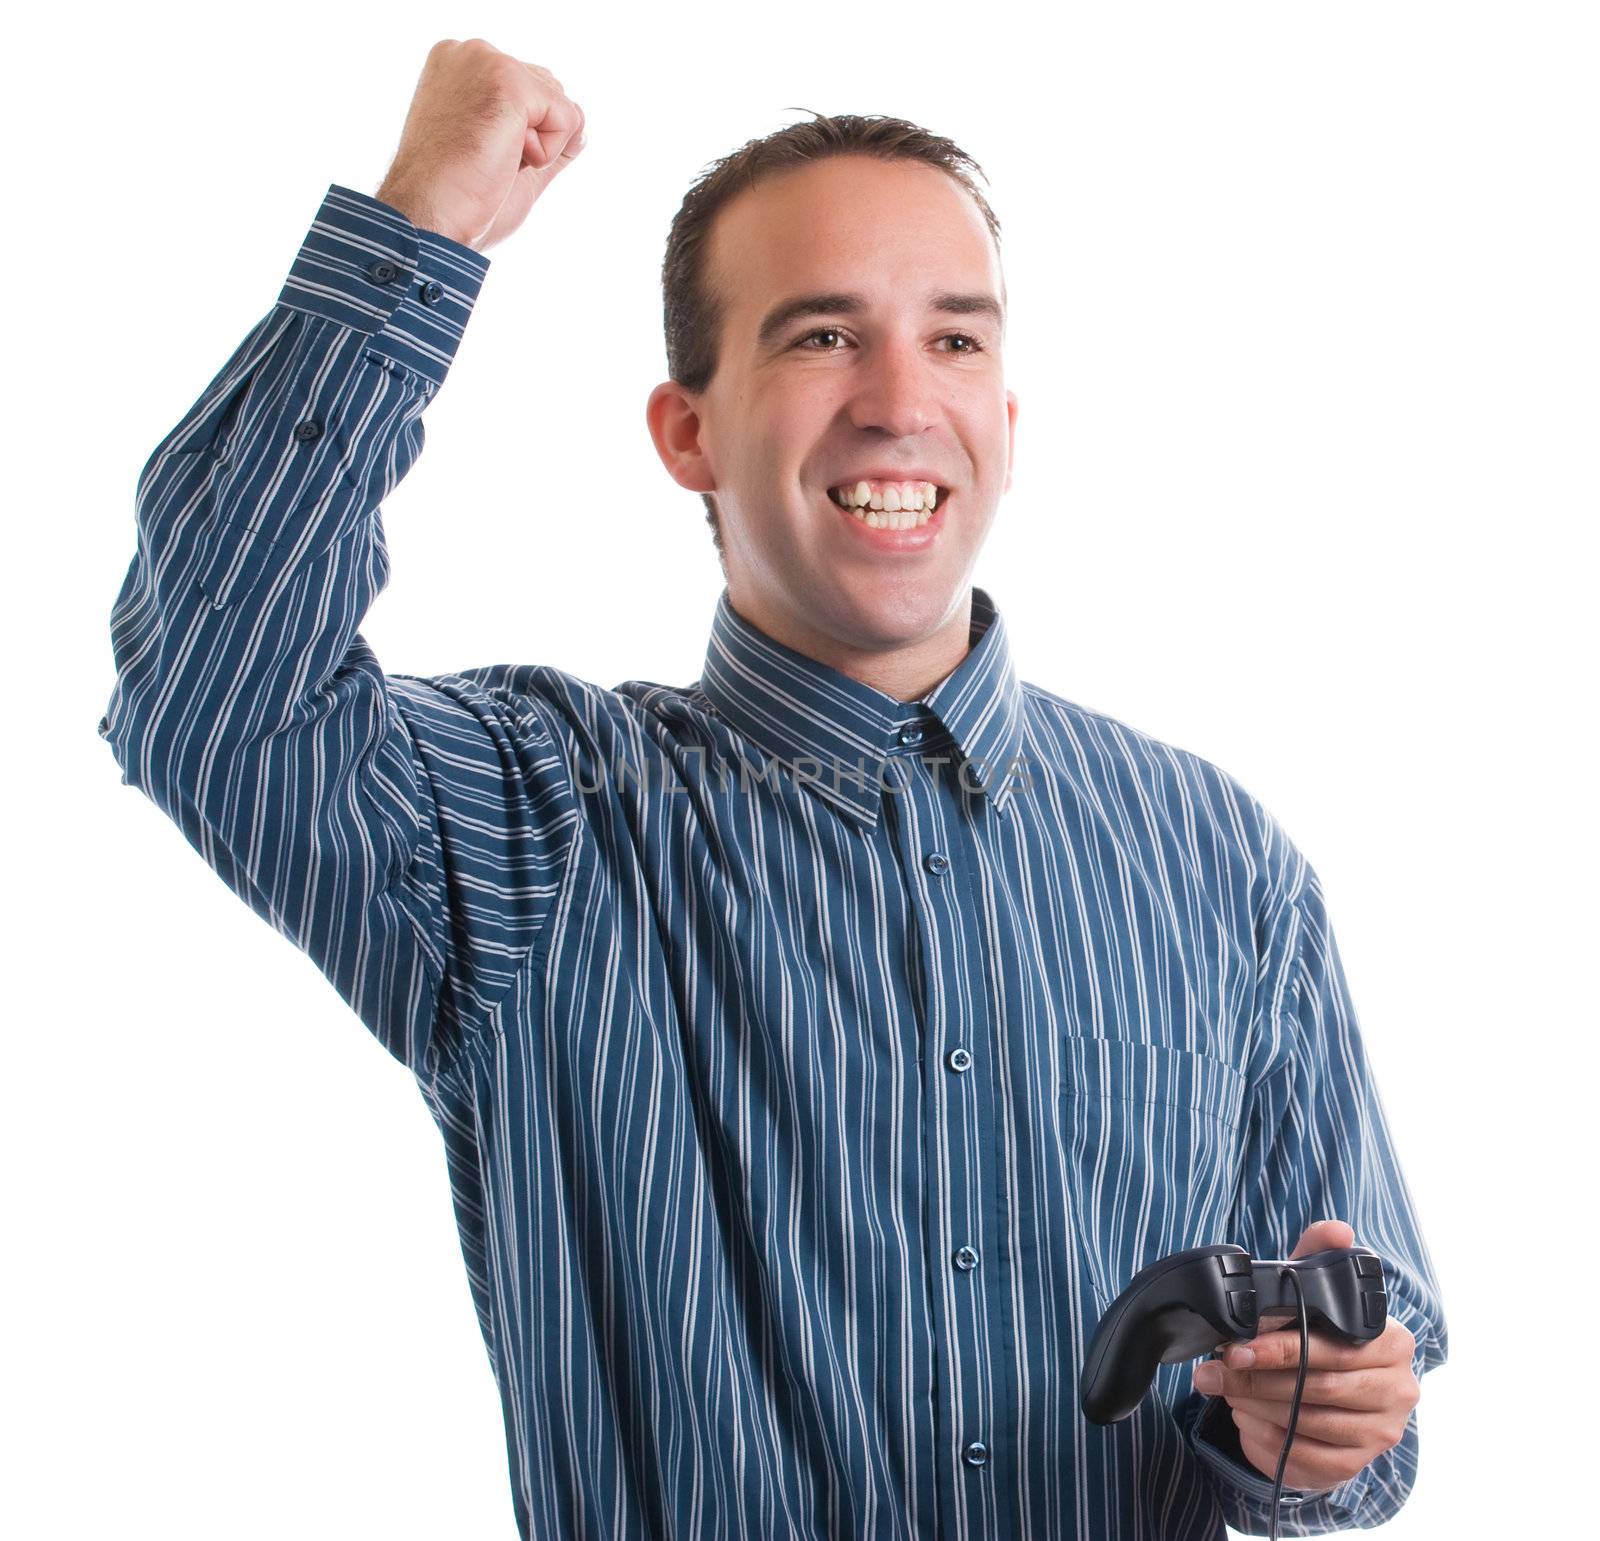 An adult winning at his video game that he was playing, isolated against a white background